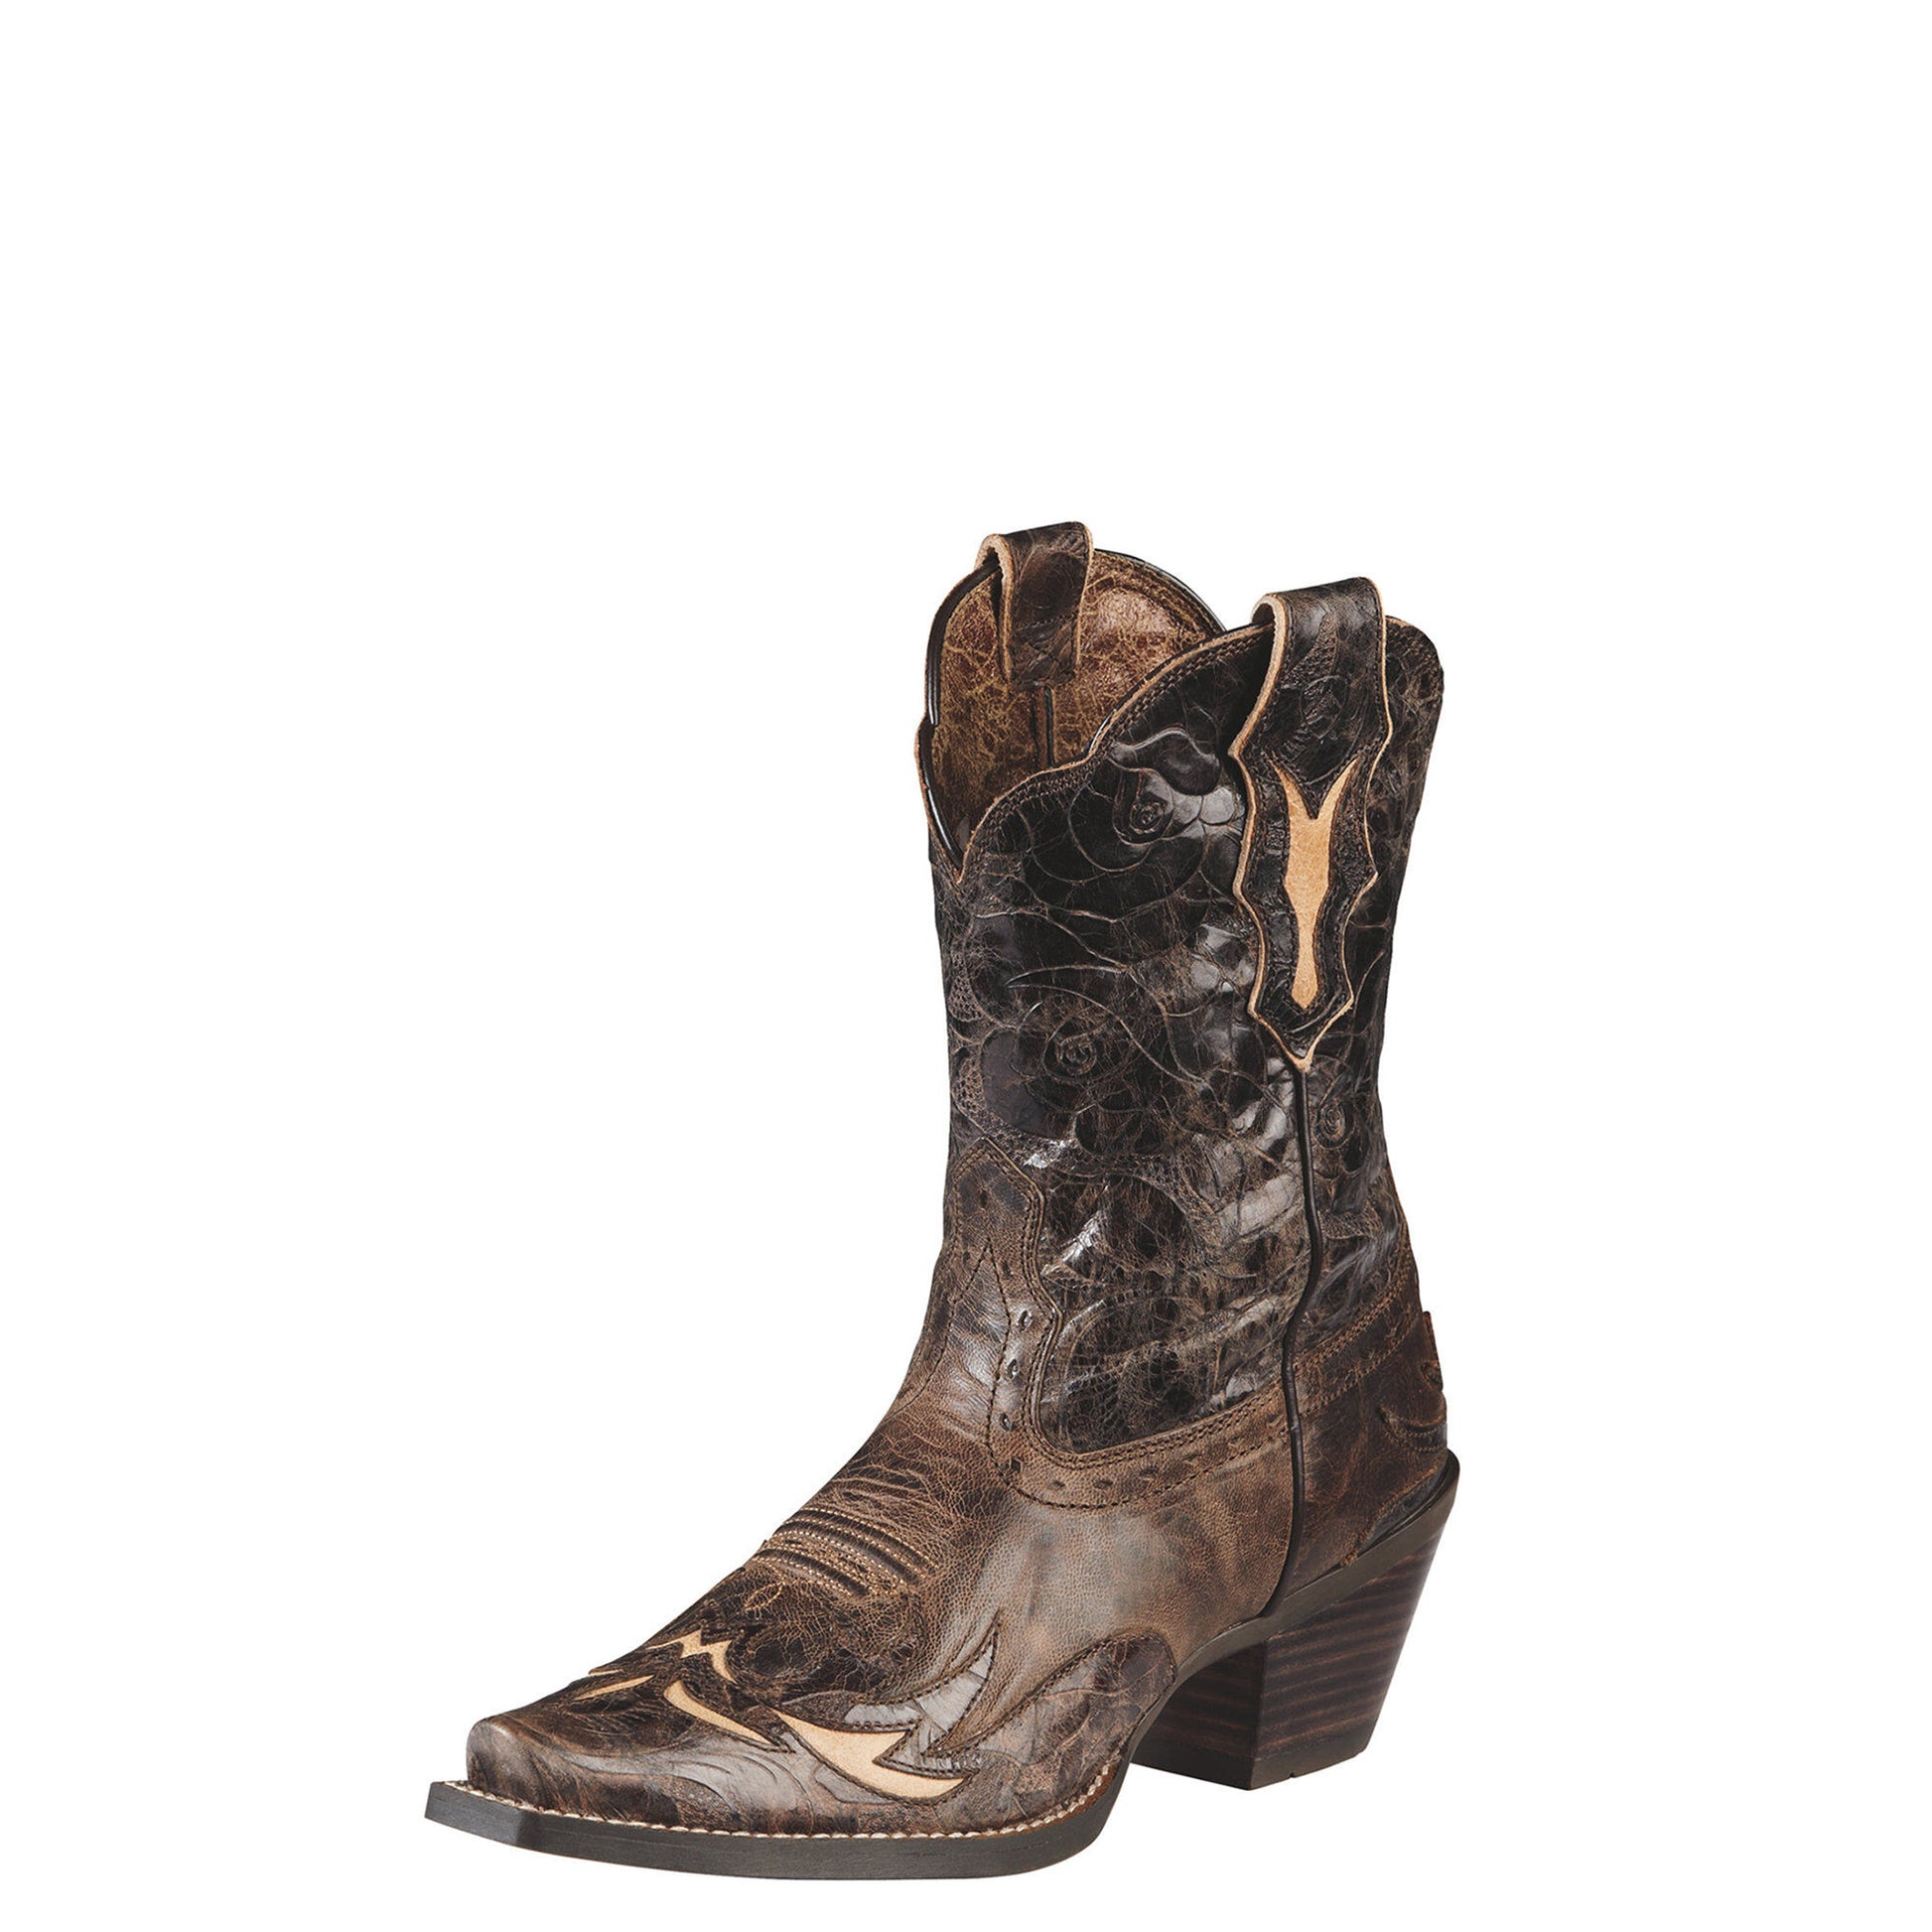 Ariat Women's Dahlia Boot - Silly Brown/Chocolate Flora - French's Boots